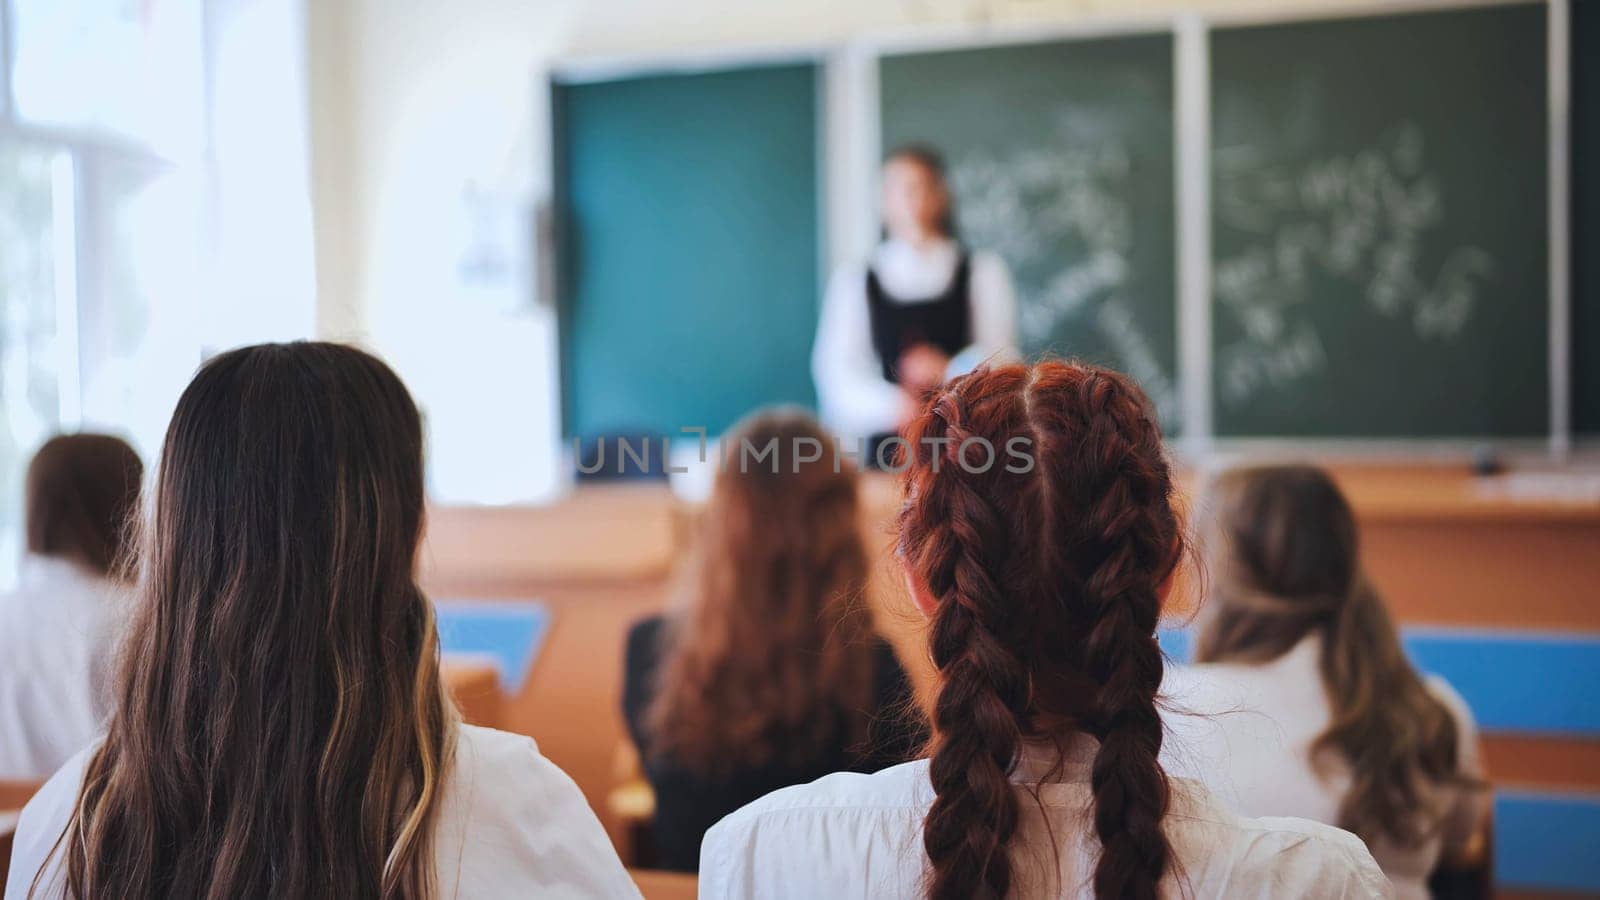 Professor pointing at college student with hand raised in classroom. Student raising a hand with a question for the teacher. Lecturer teaching in class while girl have a question to do during a lesson